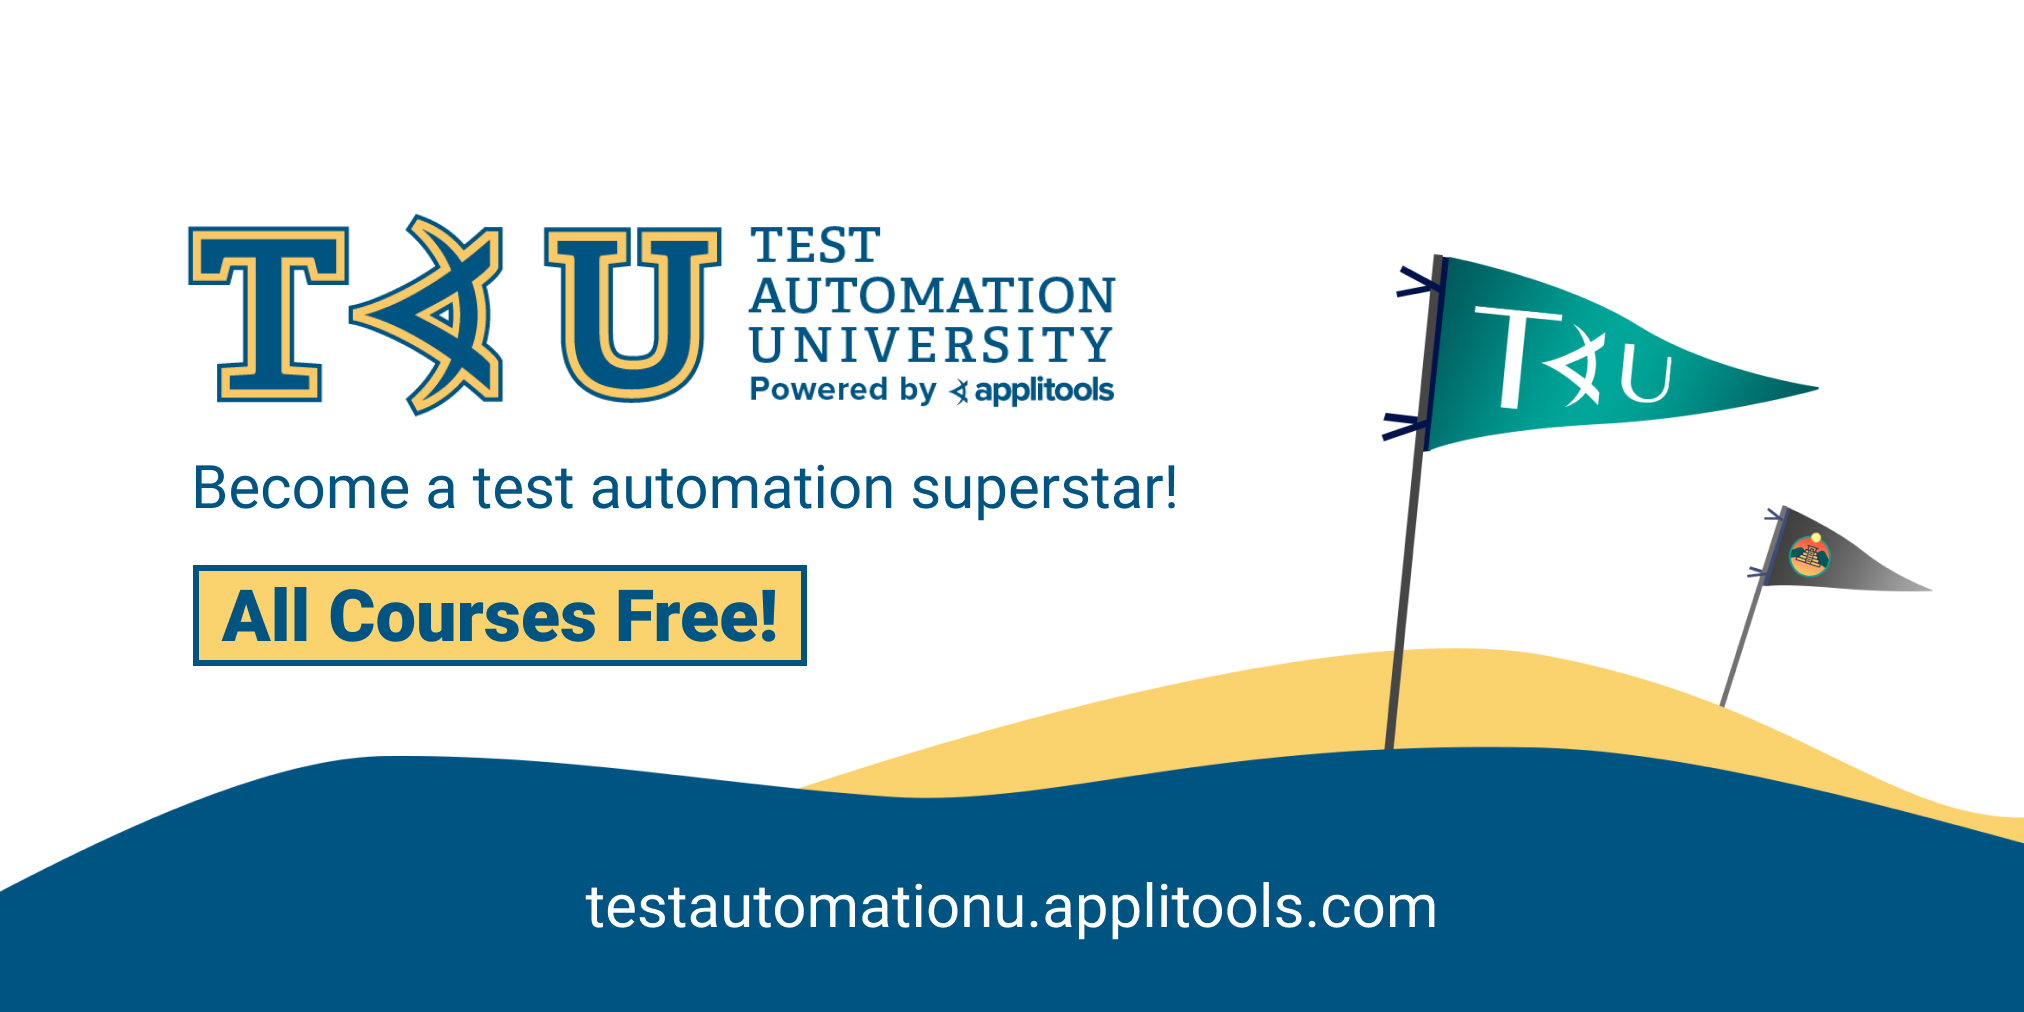 Setting a Foundation for Successful Test Automation